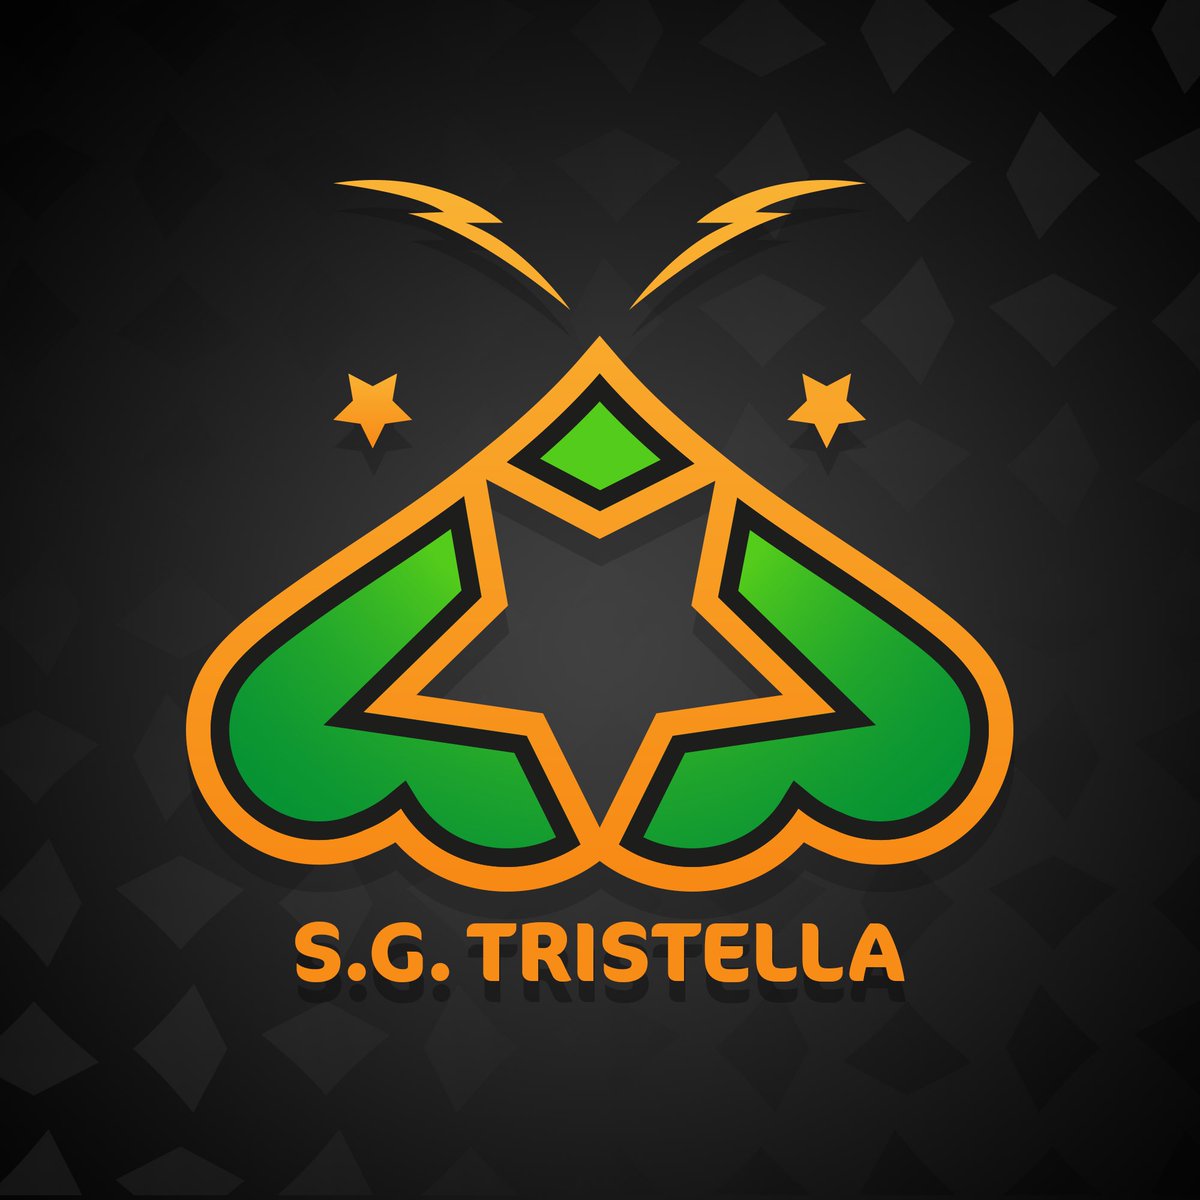 S.G.Tristella has decided to disband after the last two competitions in which we are currently participating. We are really close to missing the World Championships and will finish 9th in the world. Thanks to all of you for all of your support!